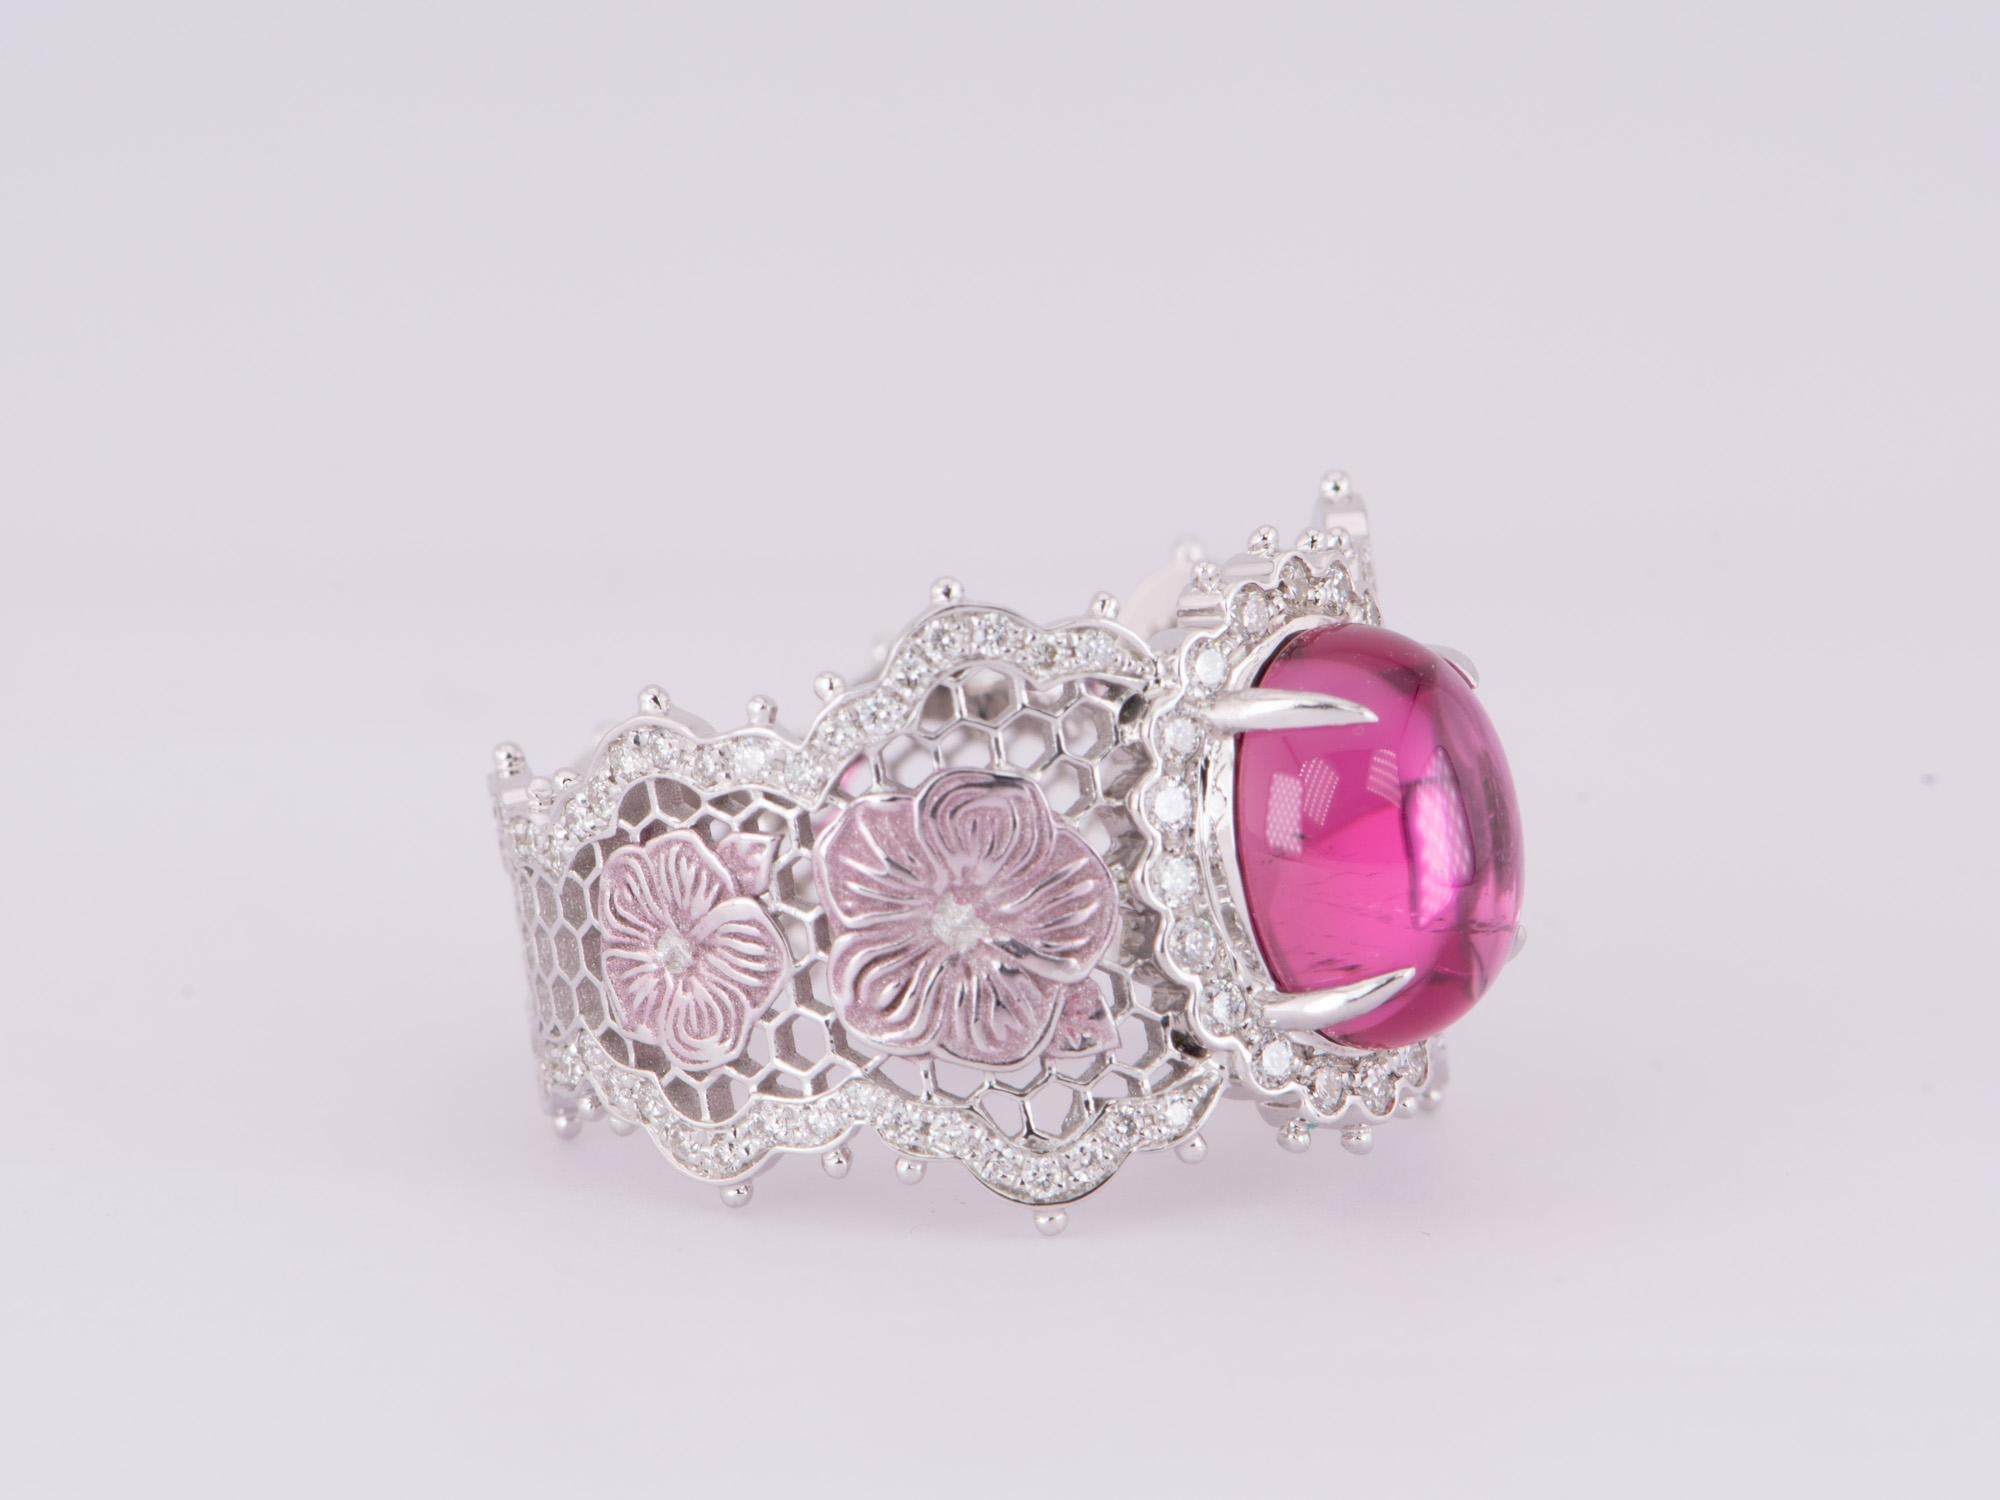 Cabochon 2.52ct Rubellite Tourmaline Ring 18K White Gold Wide Band Lace Floral Design For Sale